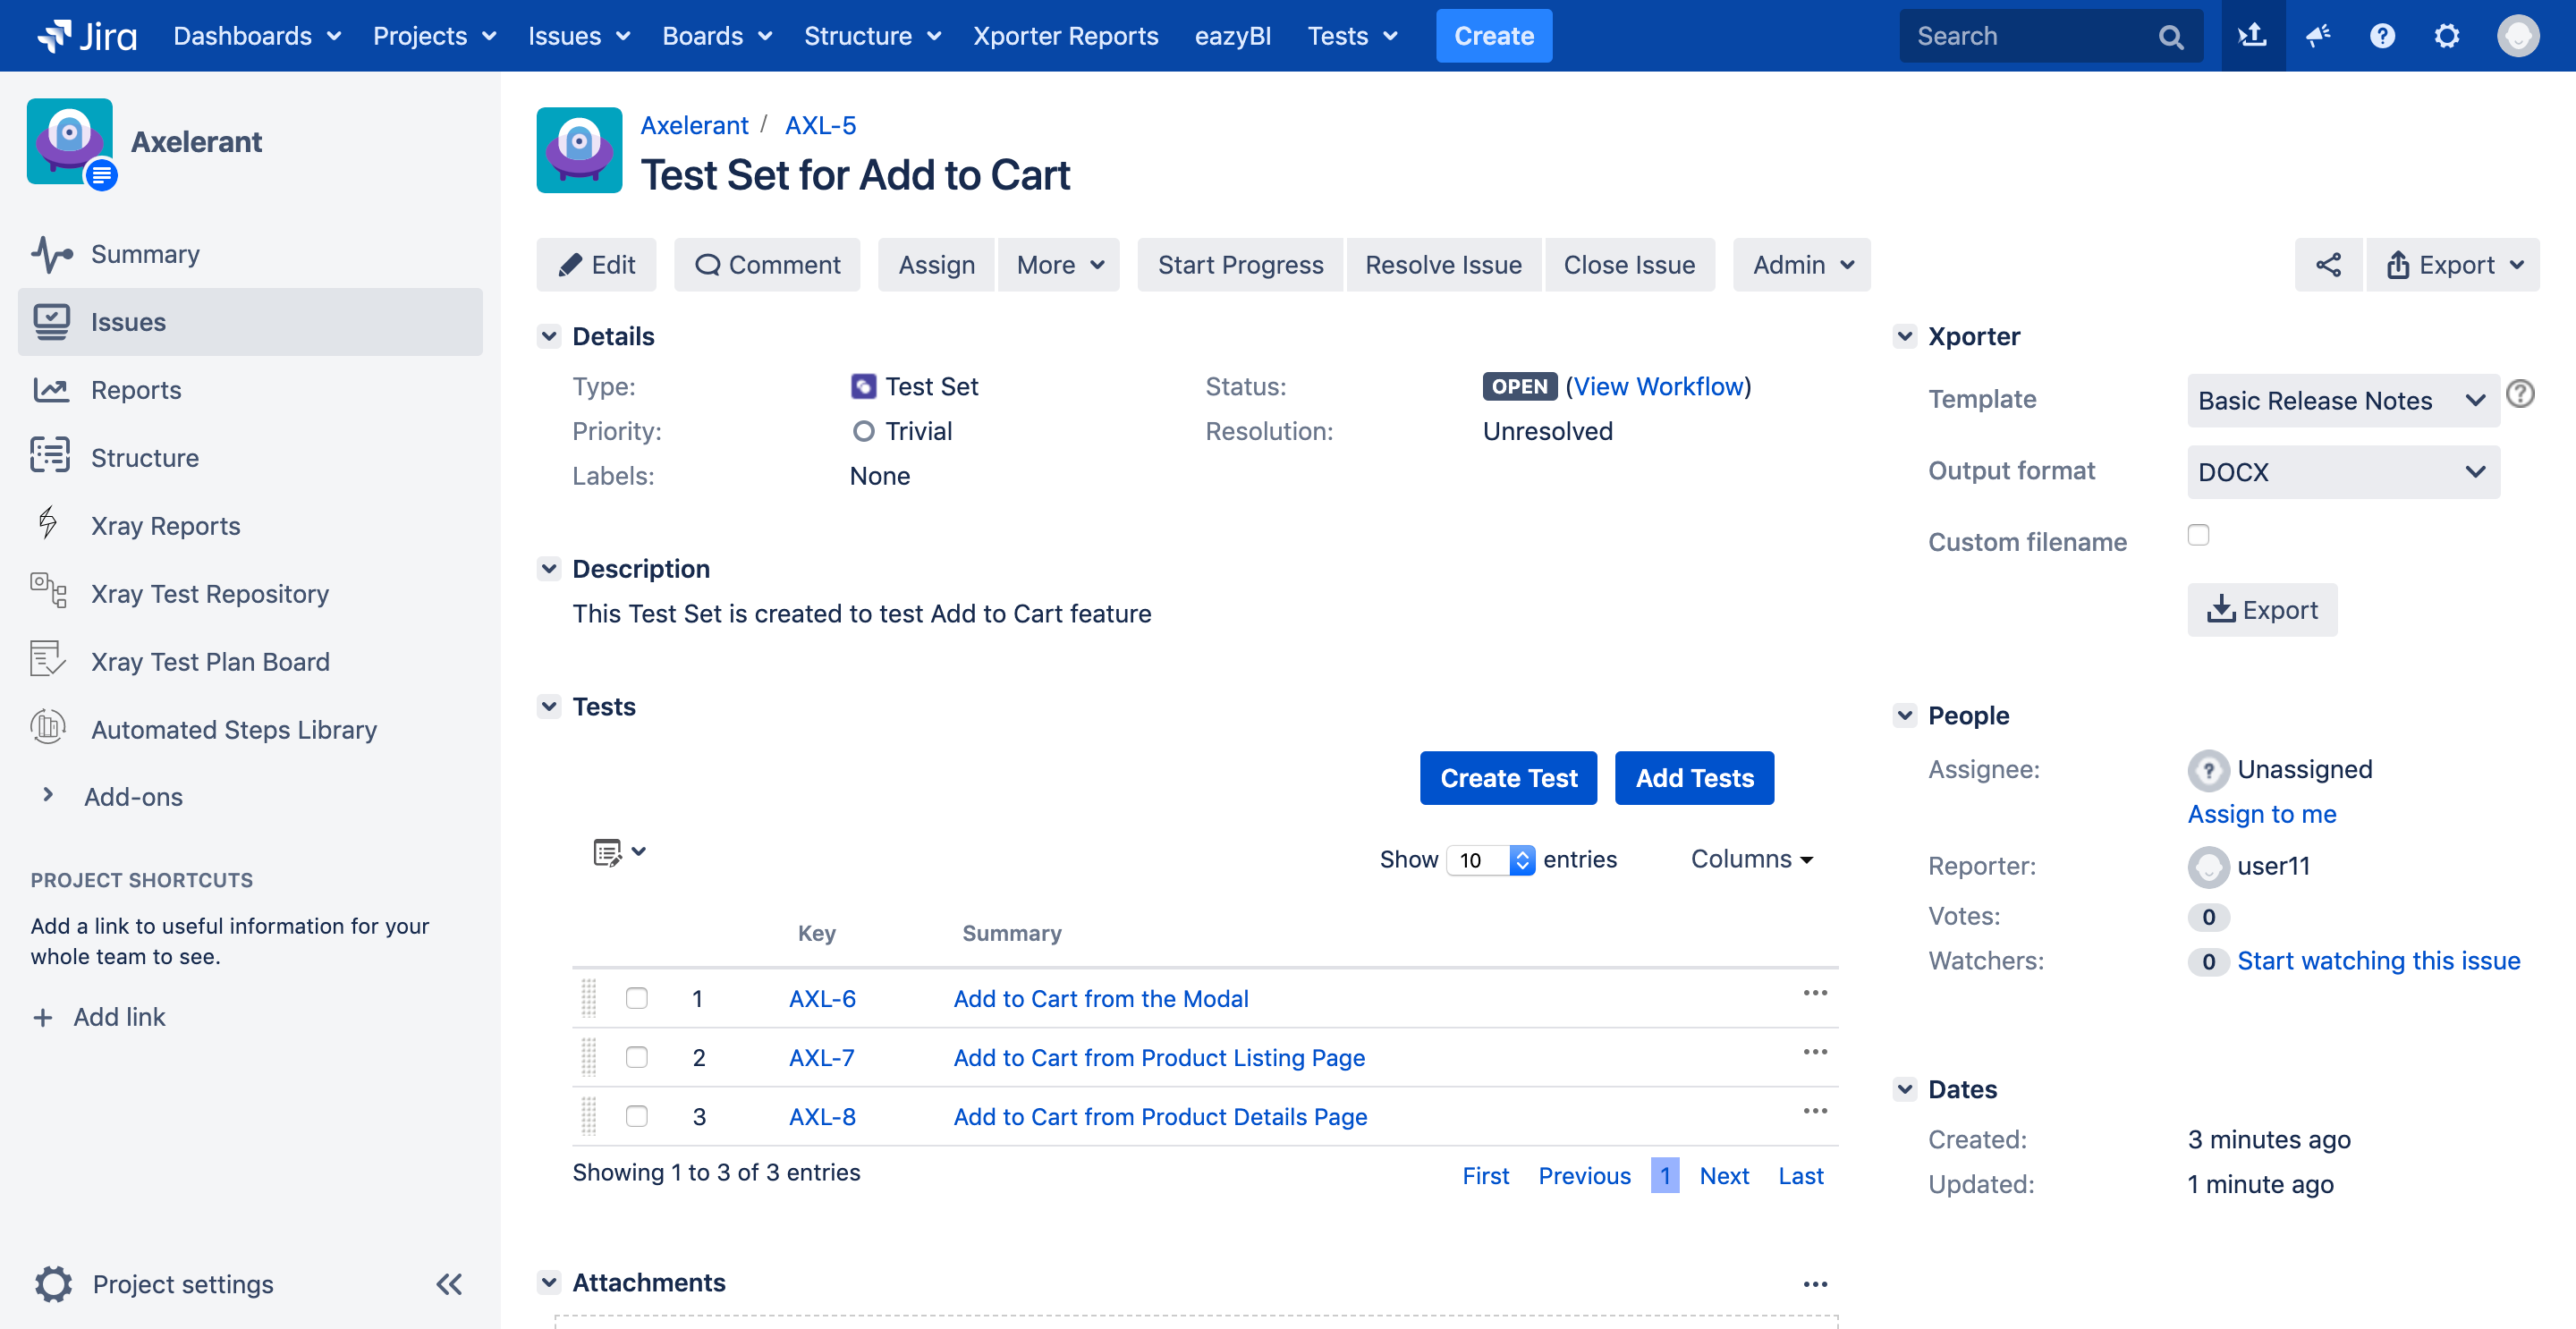 screenshot of Jira board for test set for Add to Cart